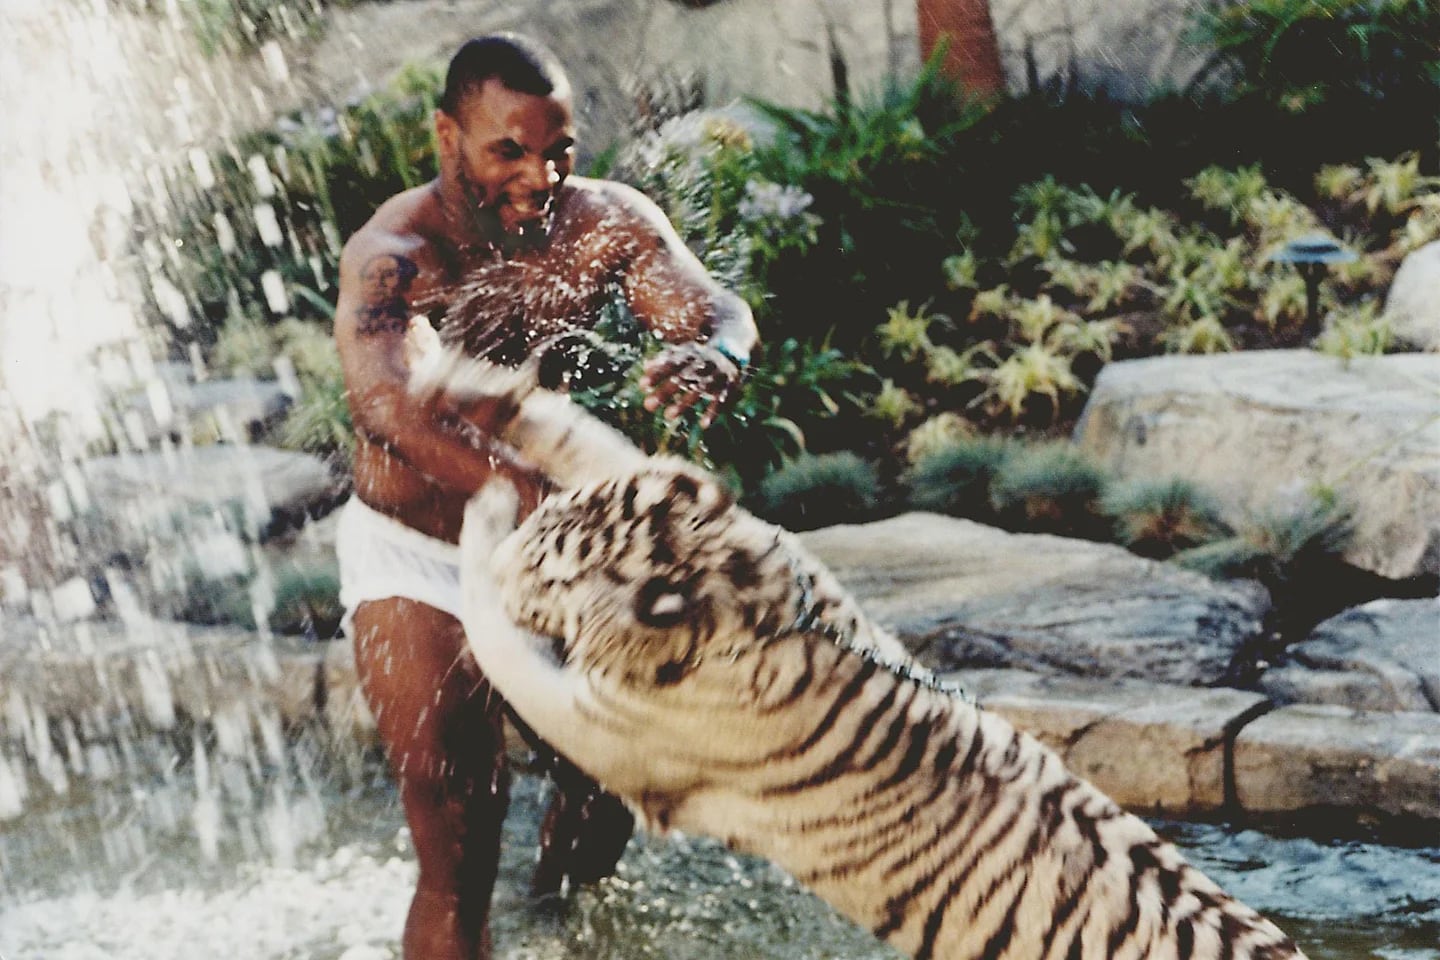 Mike Tyson revealed what the worst part was about sleeping with his Bengal tigers - Infobae